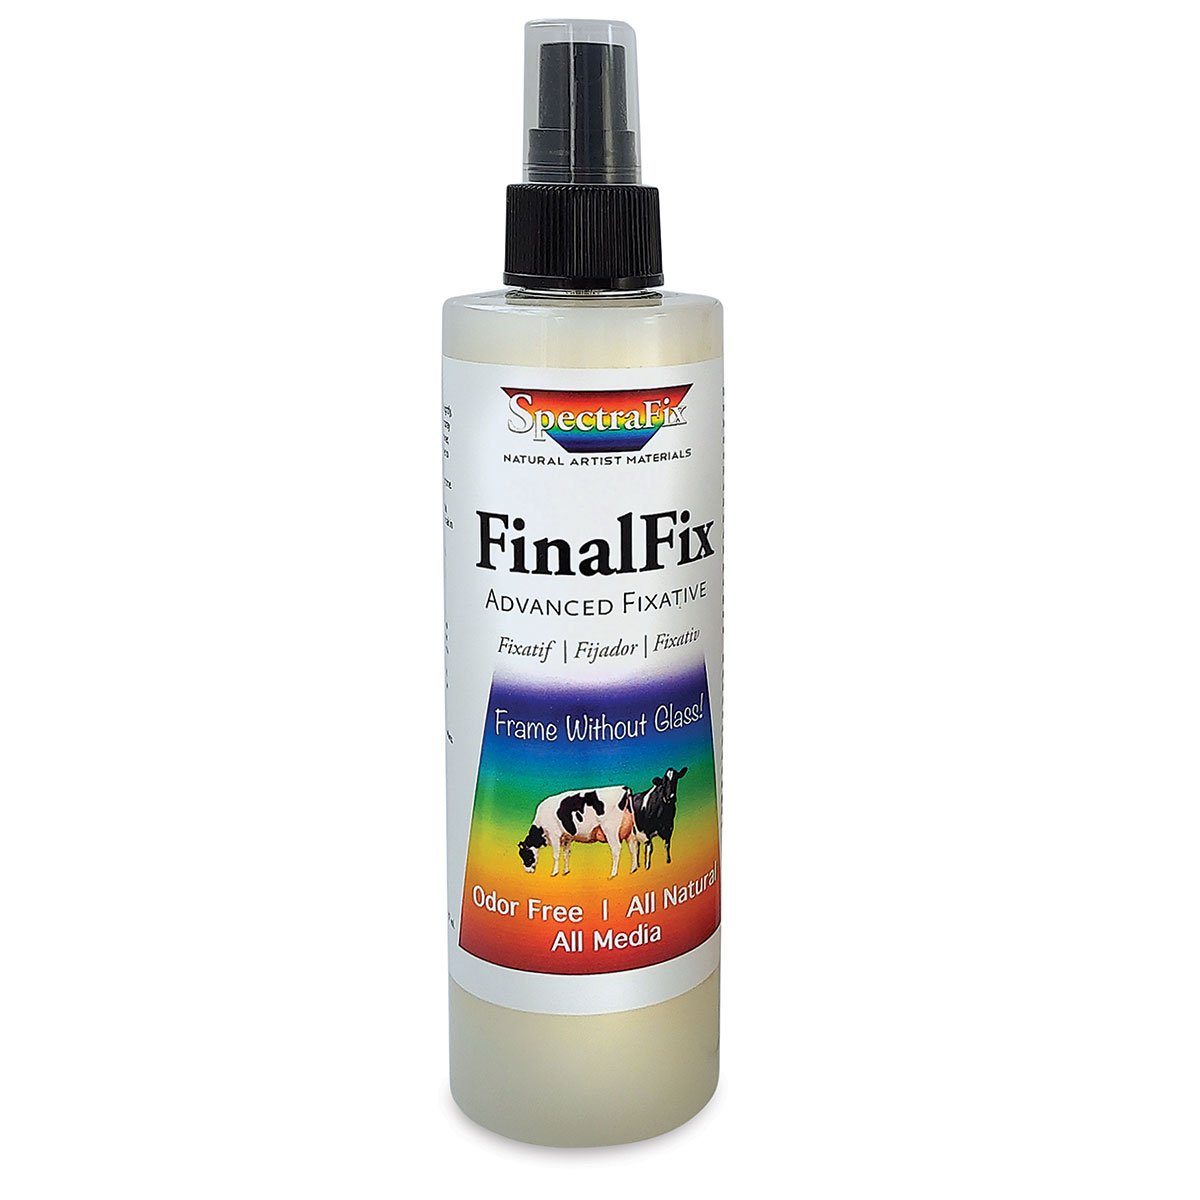 Fixative spray for Drawings 